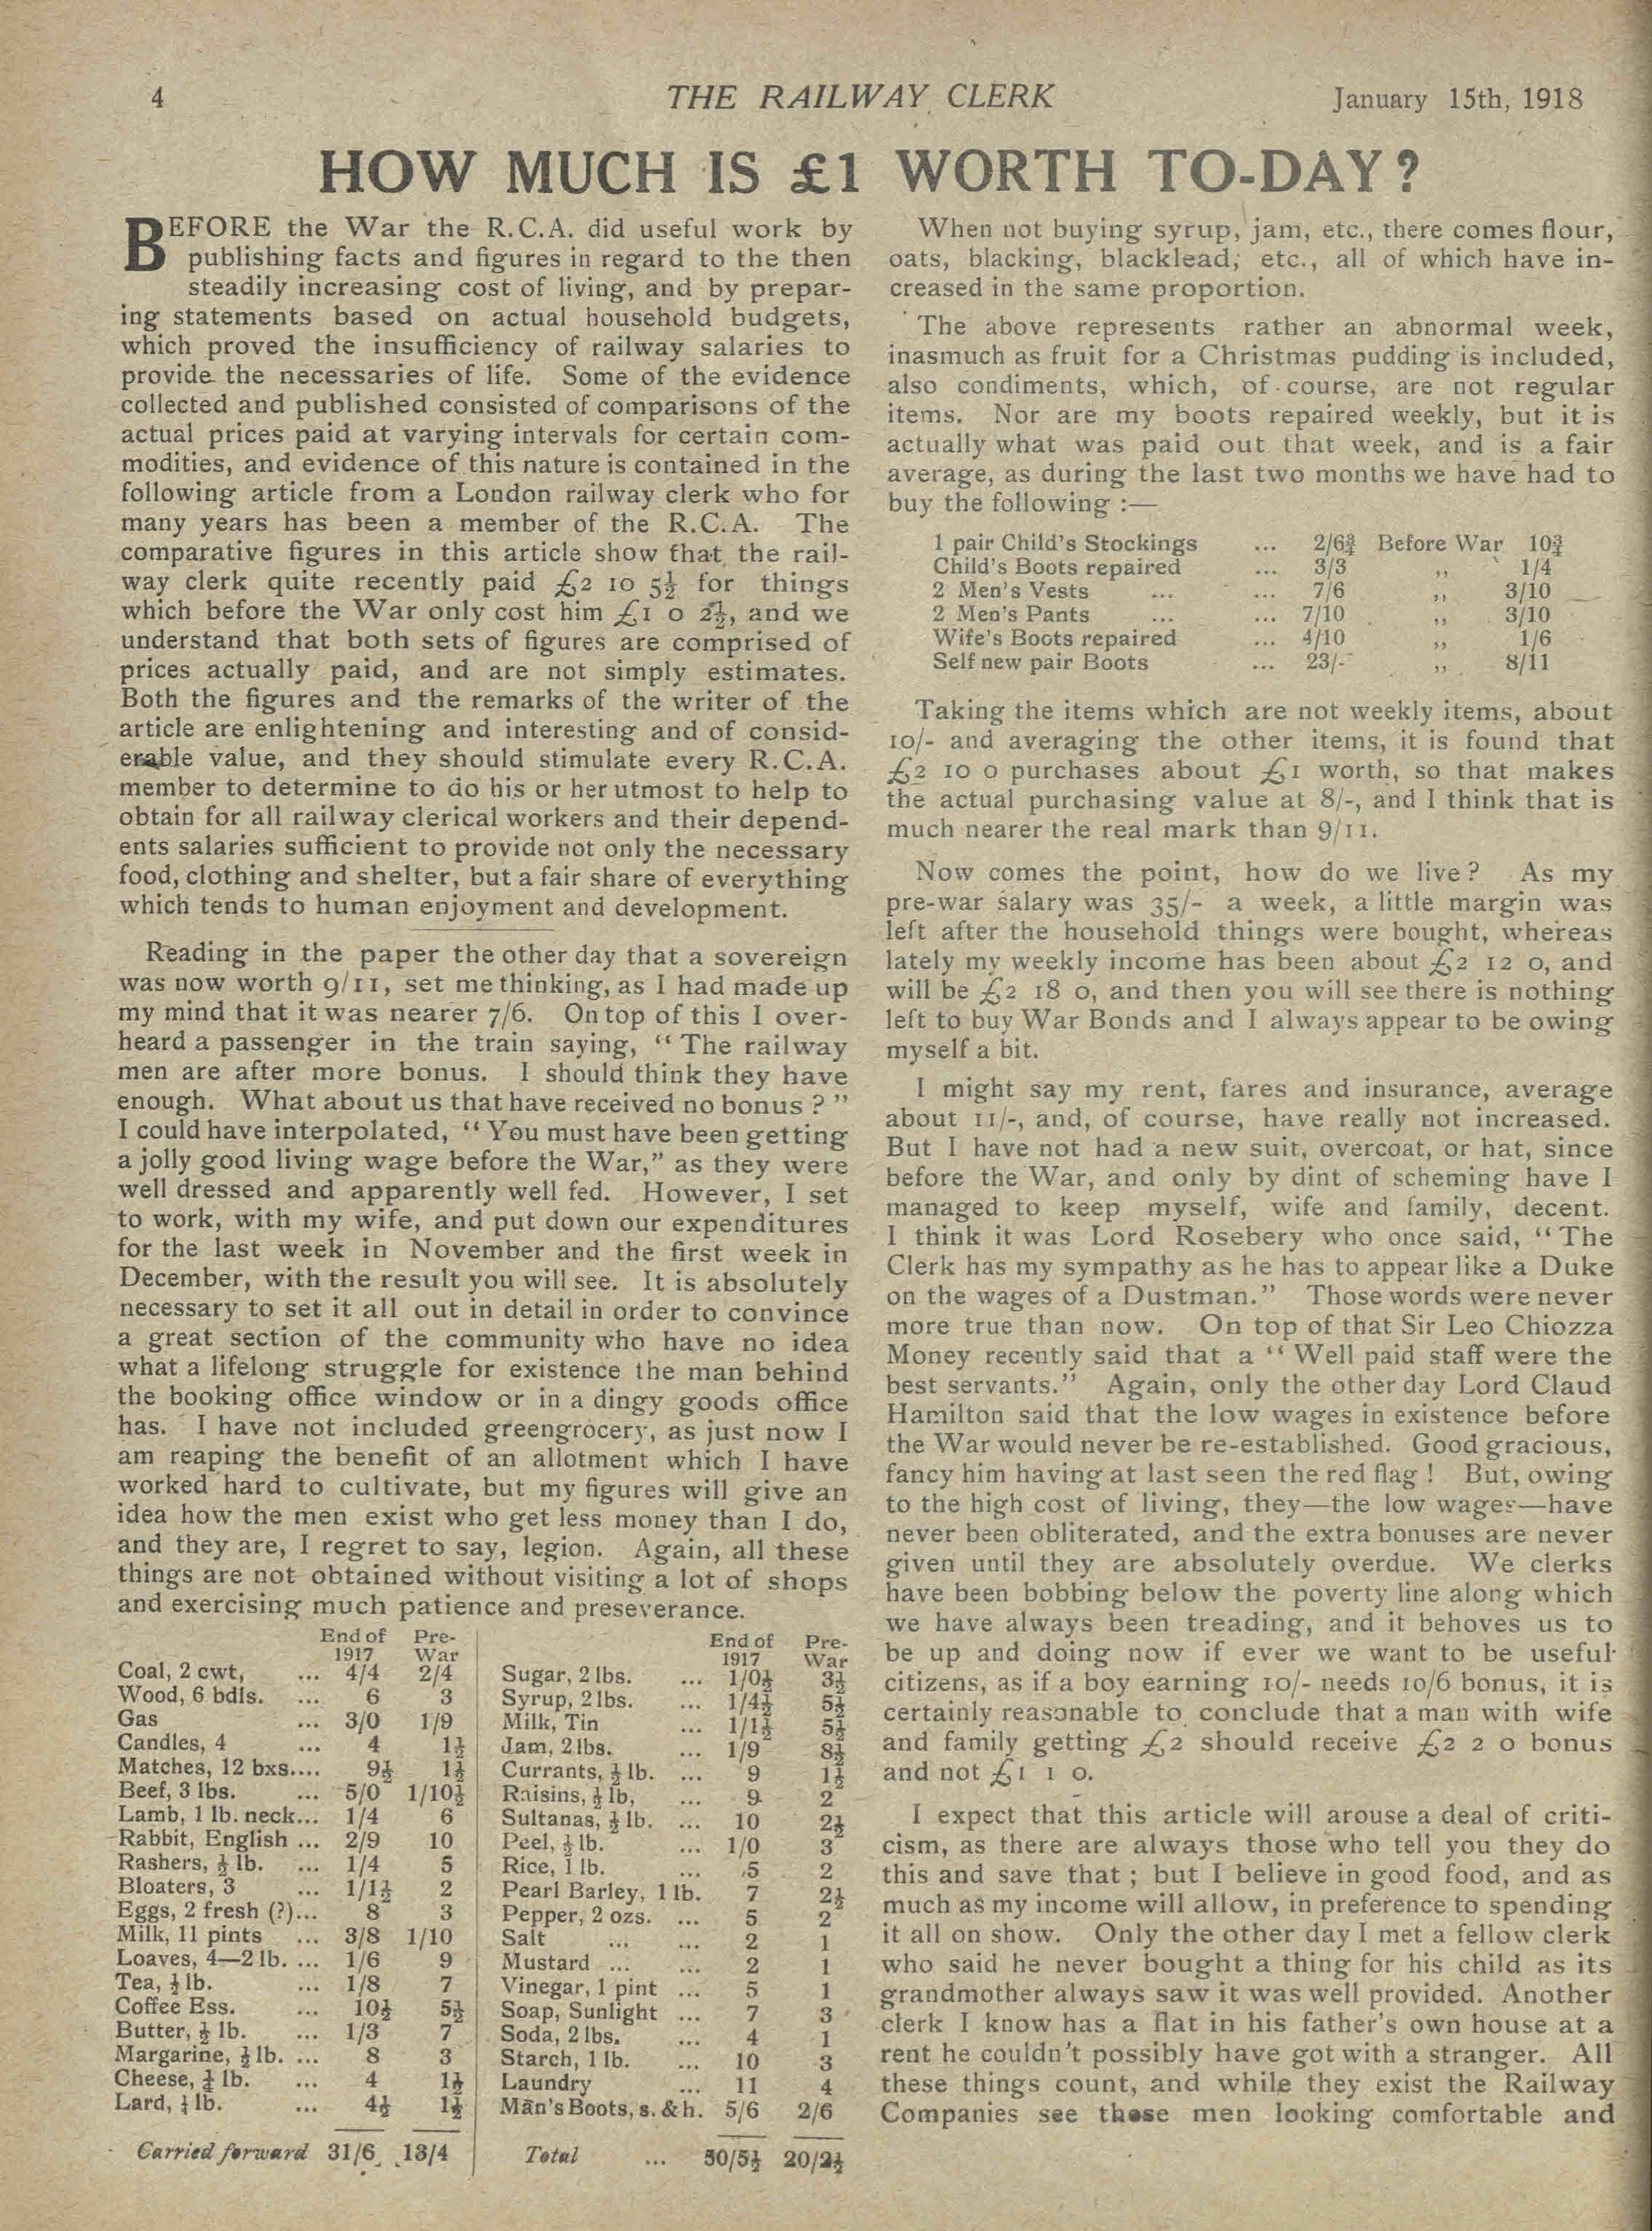 Page from The Railway Clerk, 15 January 1918, containing an article called "How much is £1 worth to-day?"